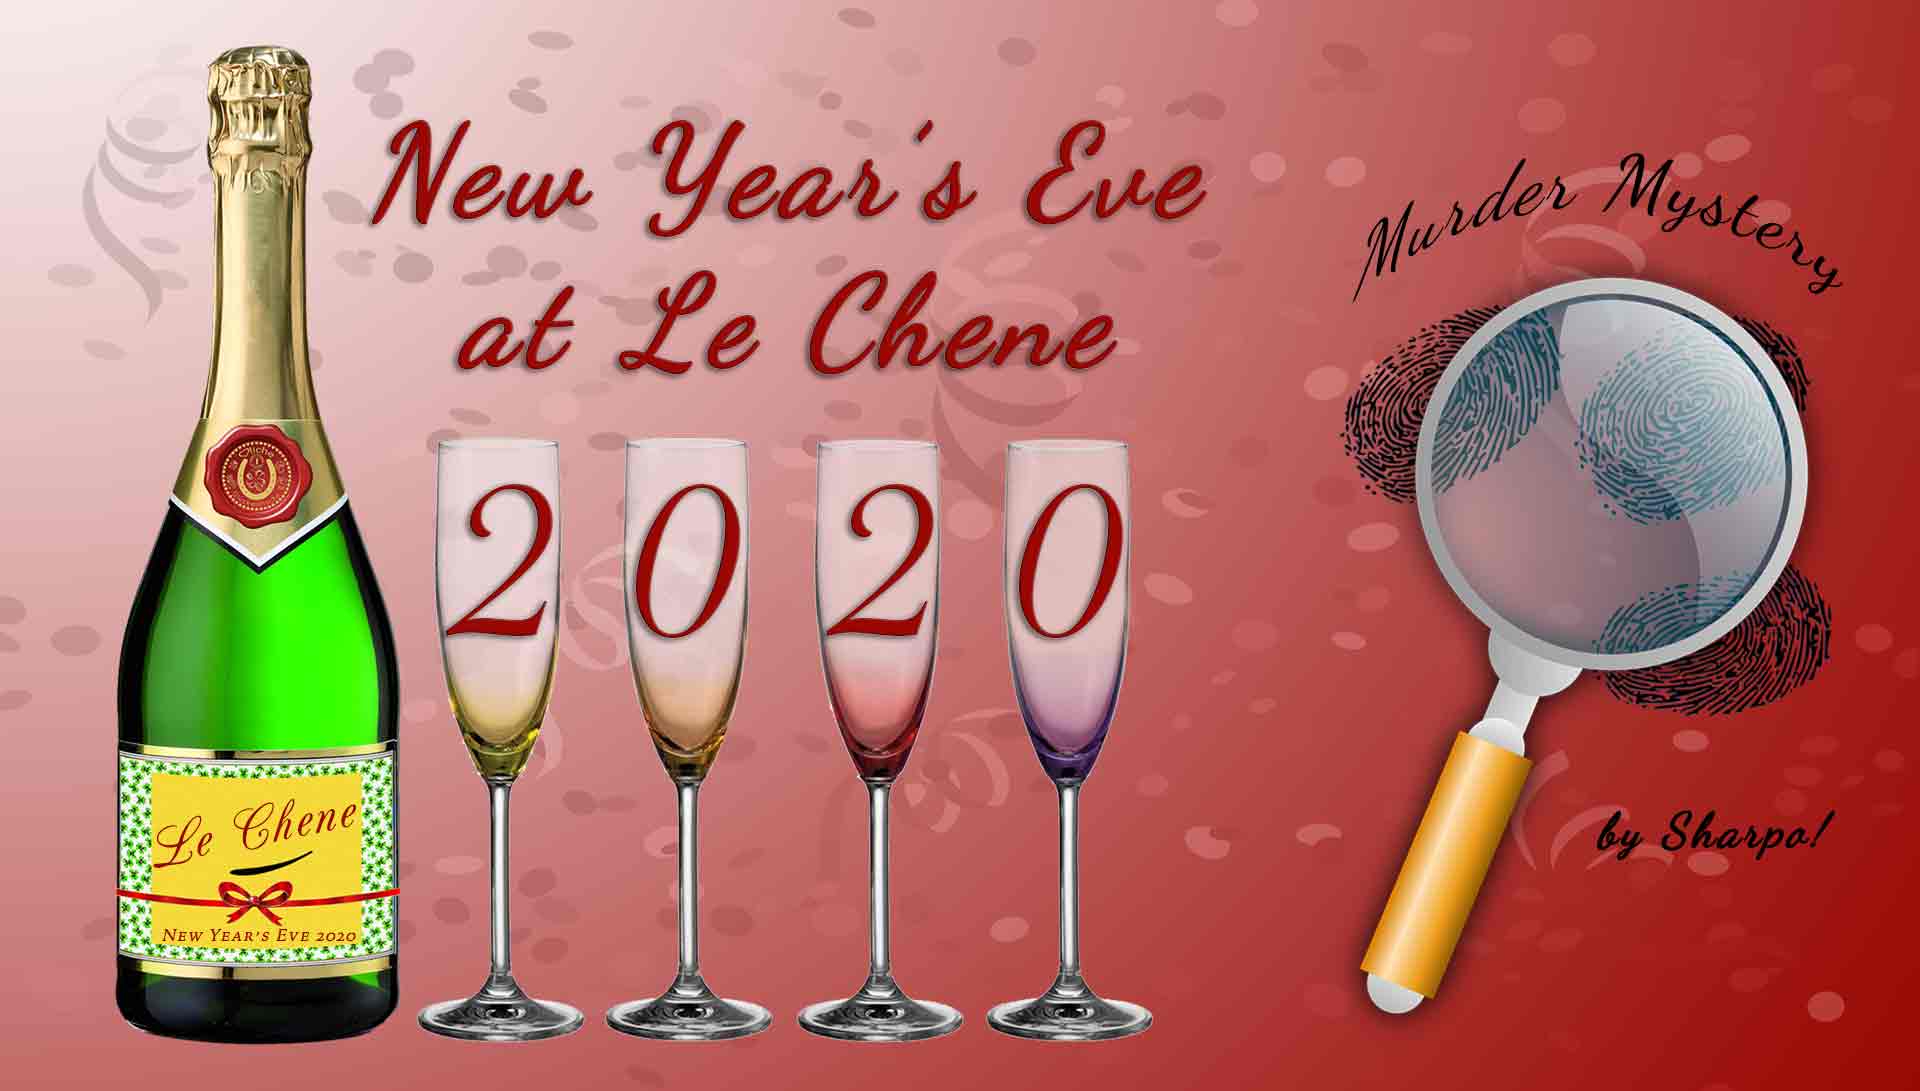 Le-Chene-New-Year's-Eve---2020-Murder-Mystery-Event-Image